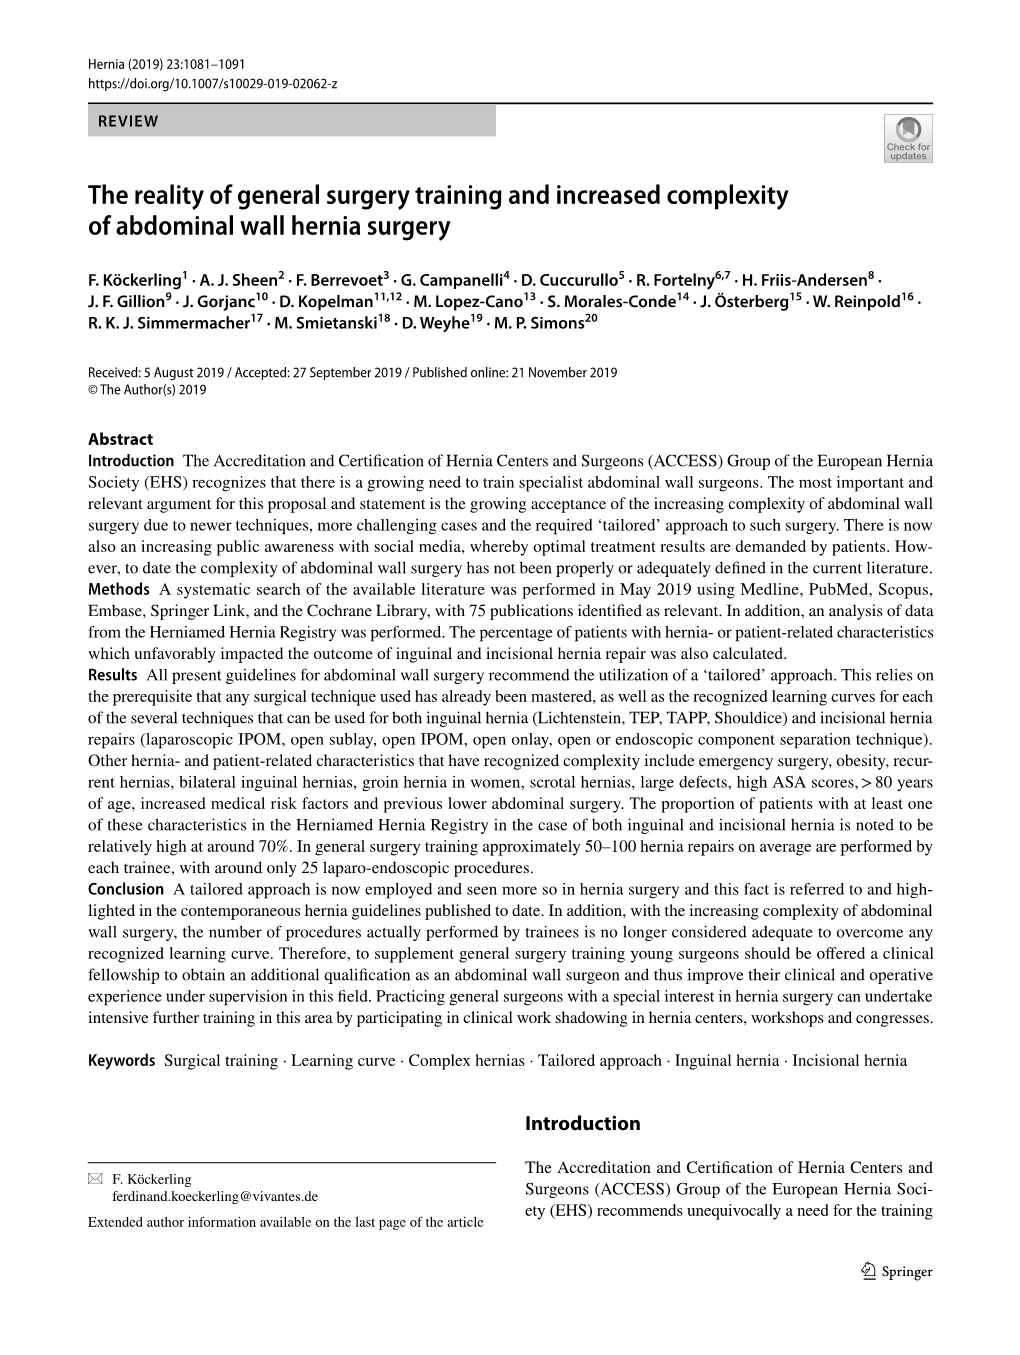 The Reality of General Surgery Training and Increased Complexity of Abdominal Wall Hernia Surgery